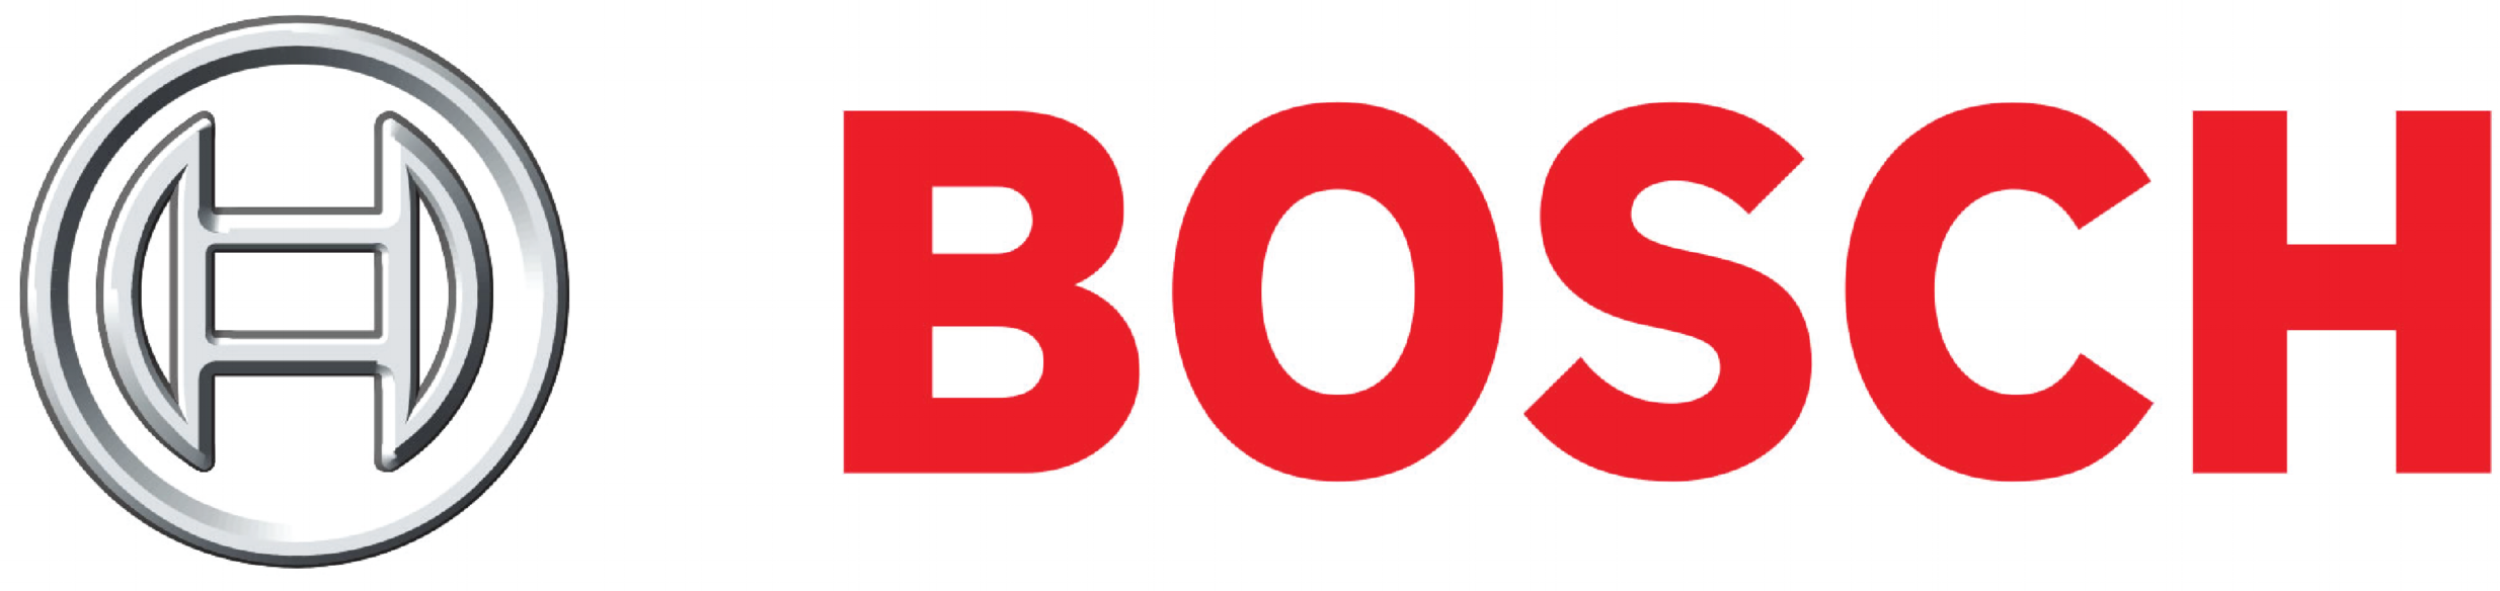 logo-bosch-png-start-the-new-year-with-a-new-career-at-robert-bosch-llc-in-charleston-sc-3333.png